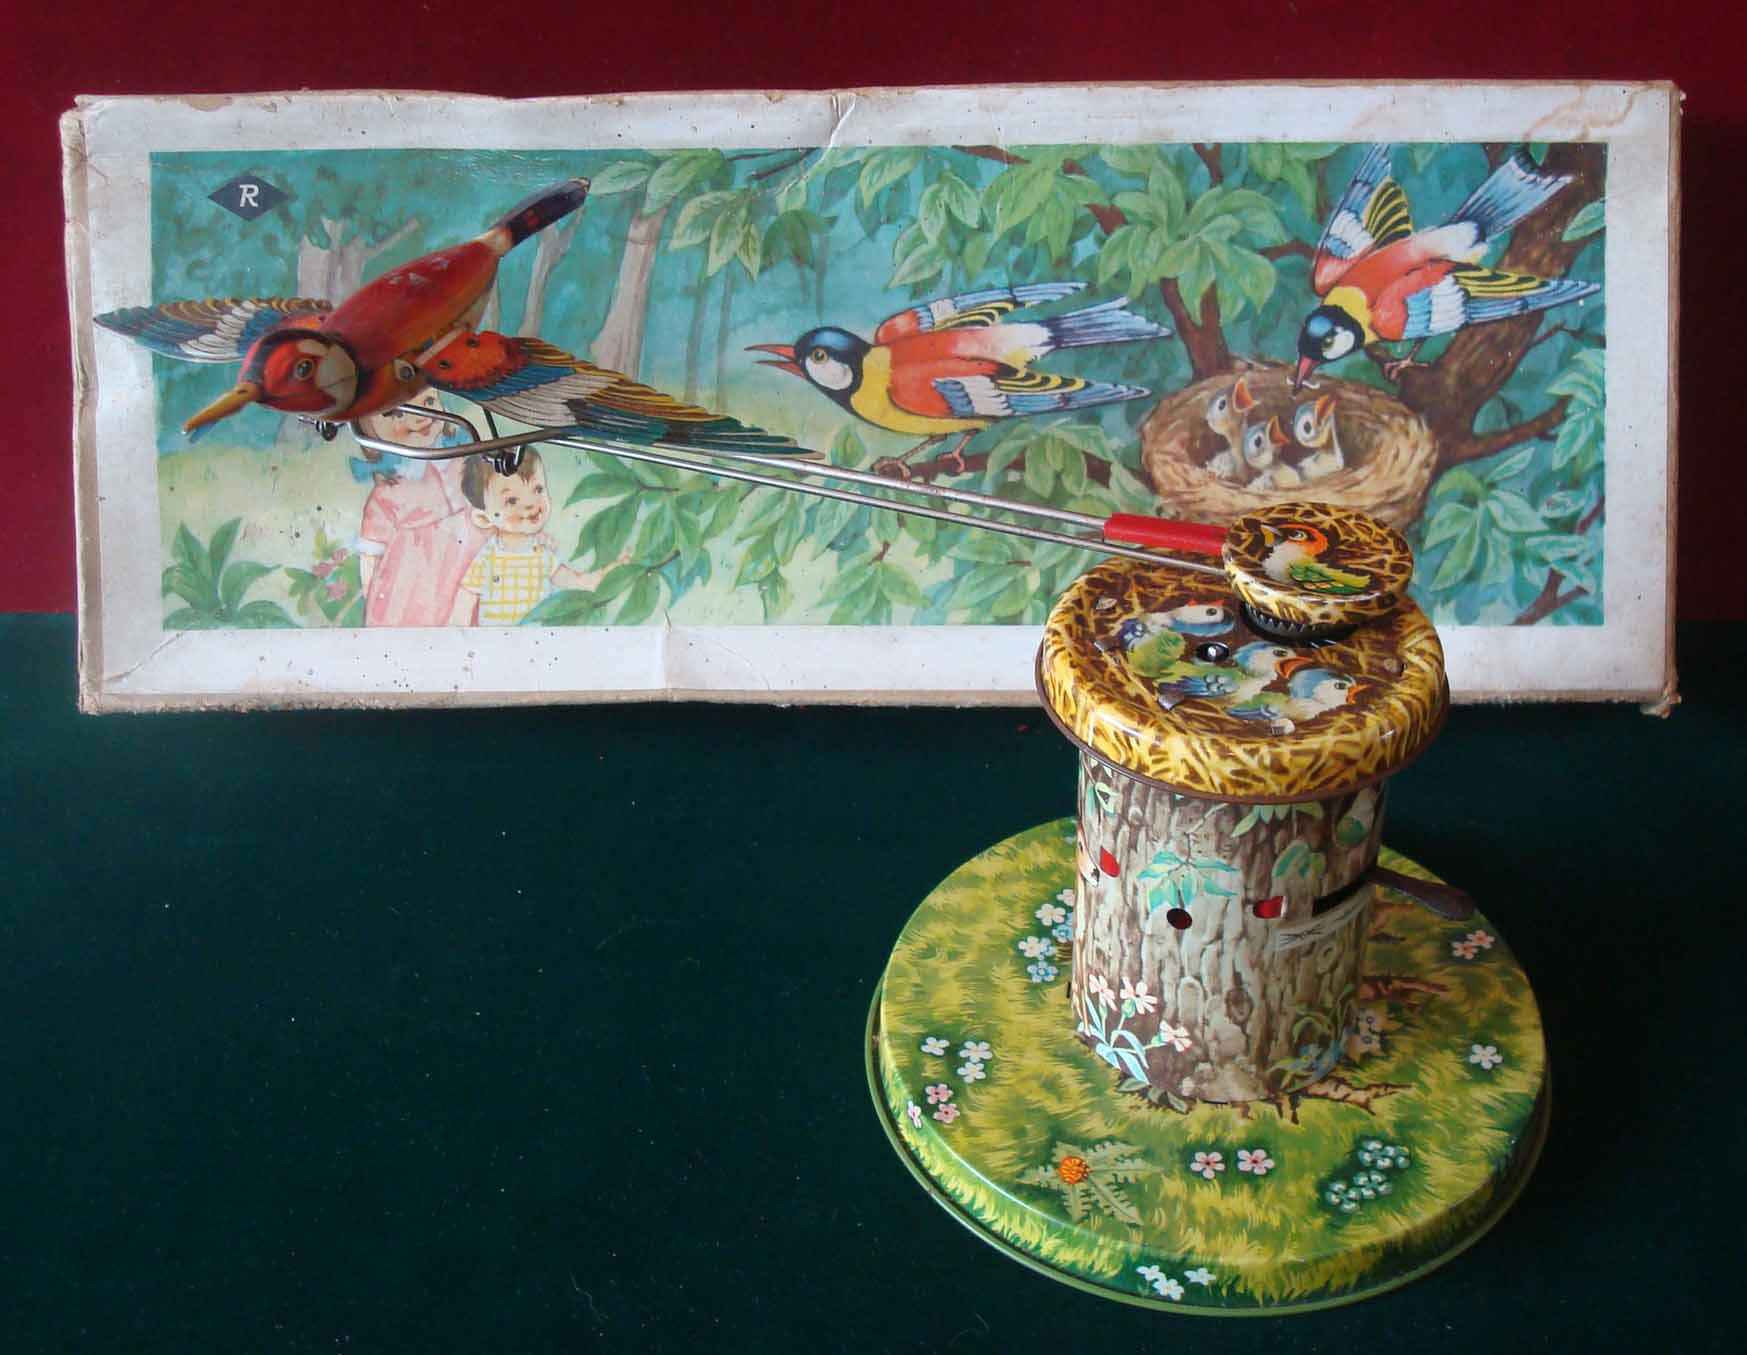 R (Western Germany) Flying Bird tinplate novelty toy: 1960s, colourfully lithographed base depicting